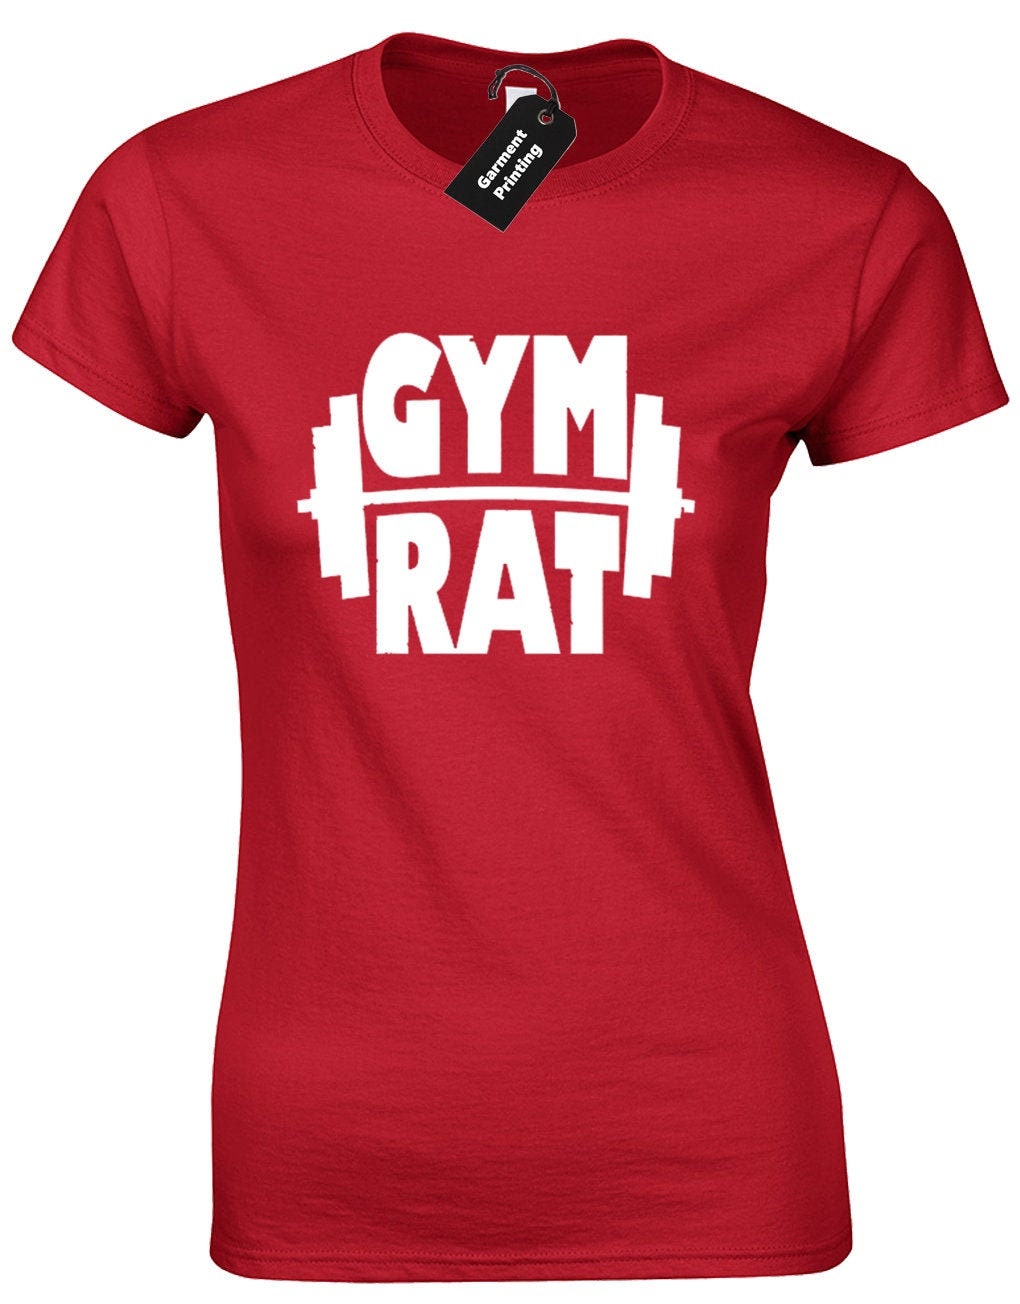 Gym Rat Ladies T Shirt Womens Fitness Training Workout - Etsy